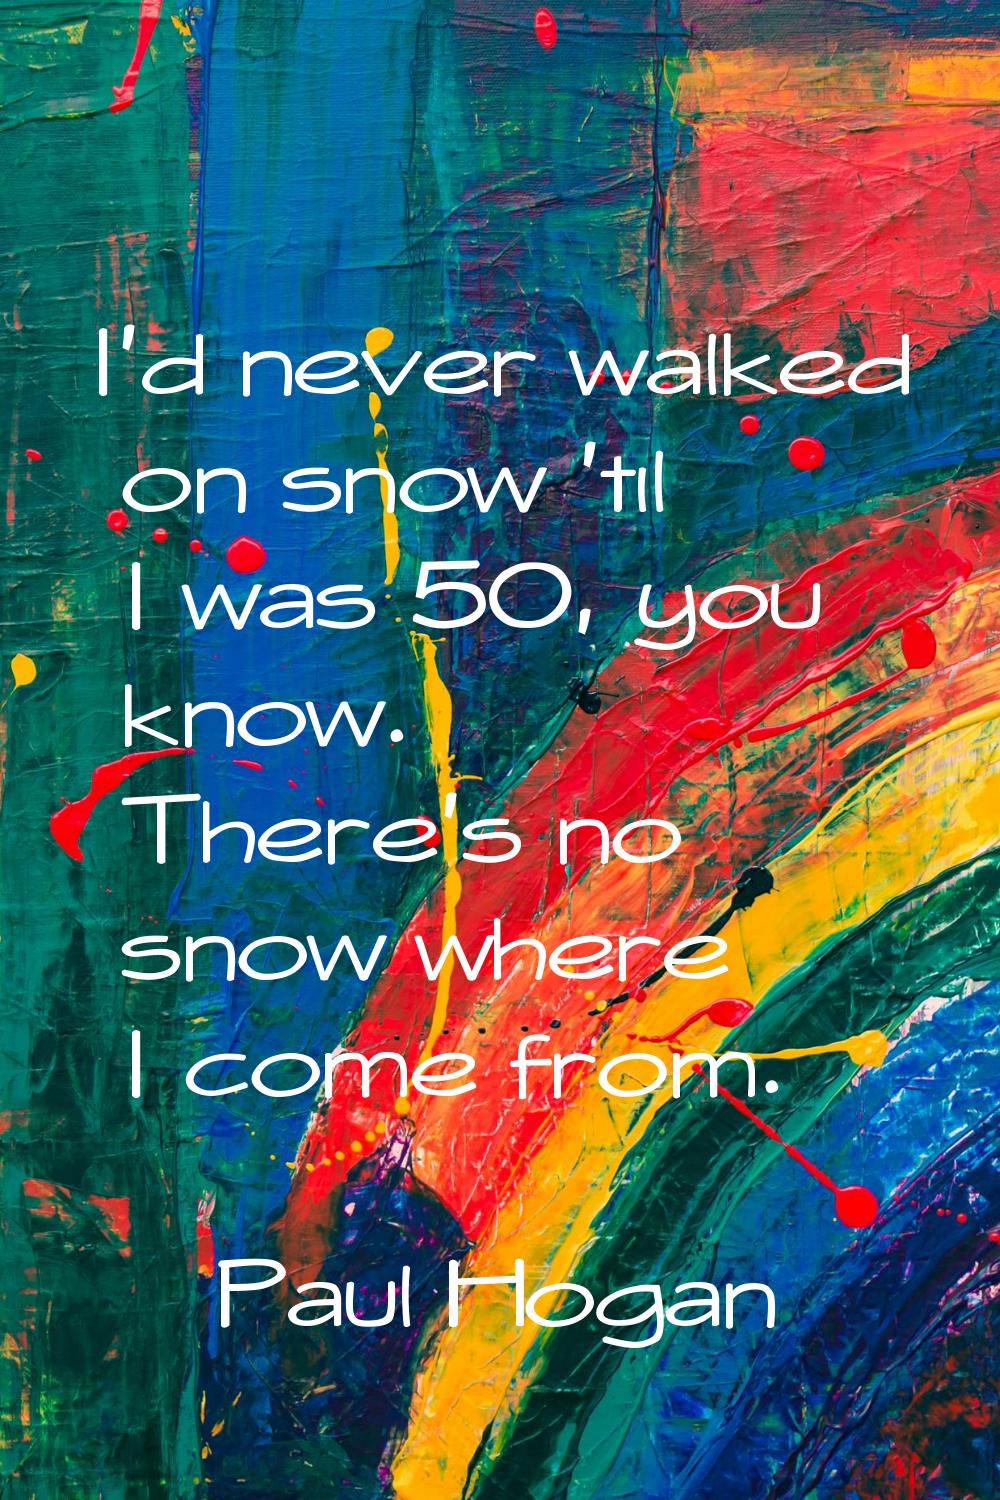 I'd never walked on snow 'til I was 50, you know. There's no snow where I come from.